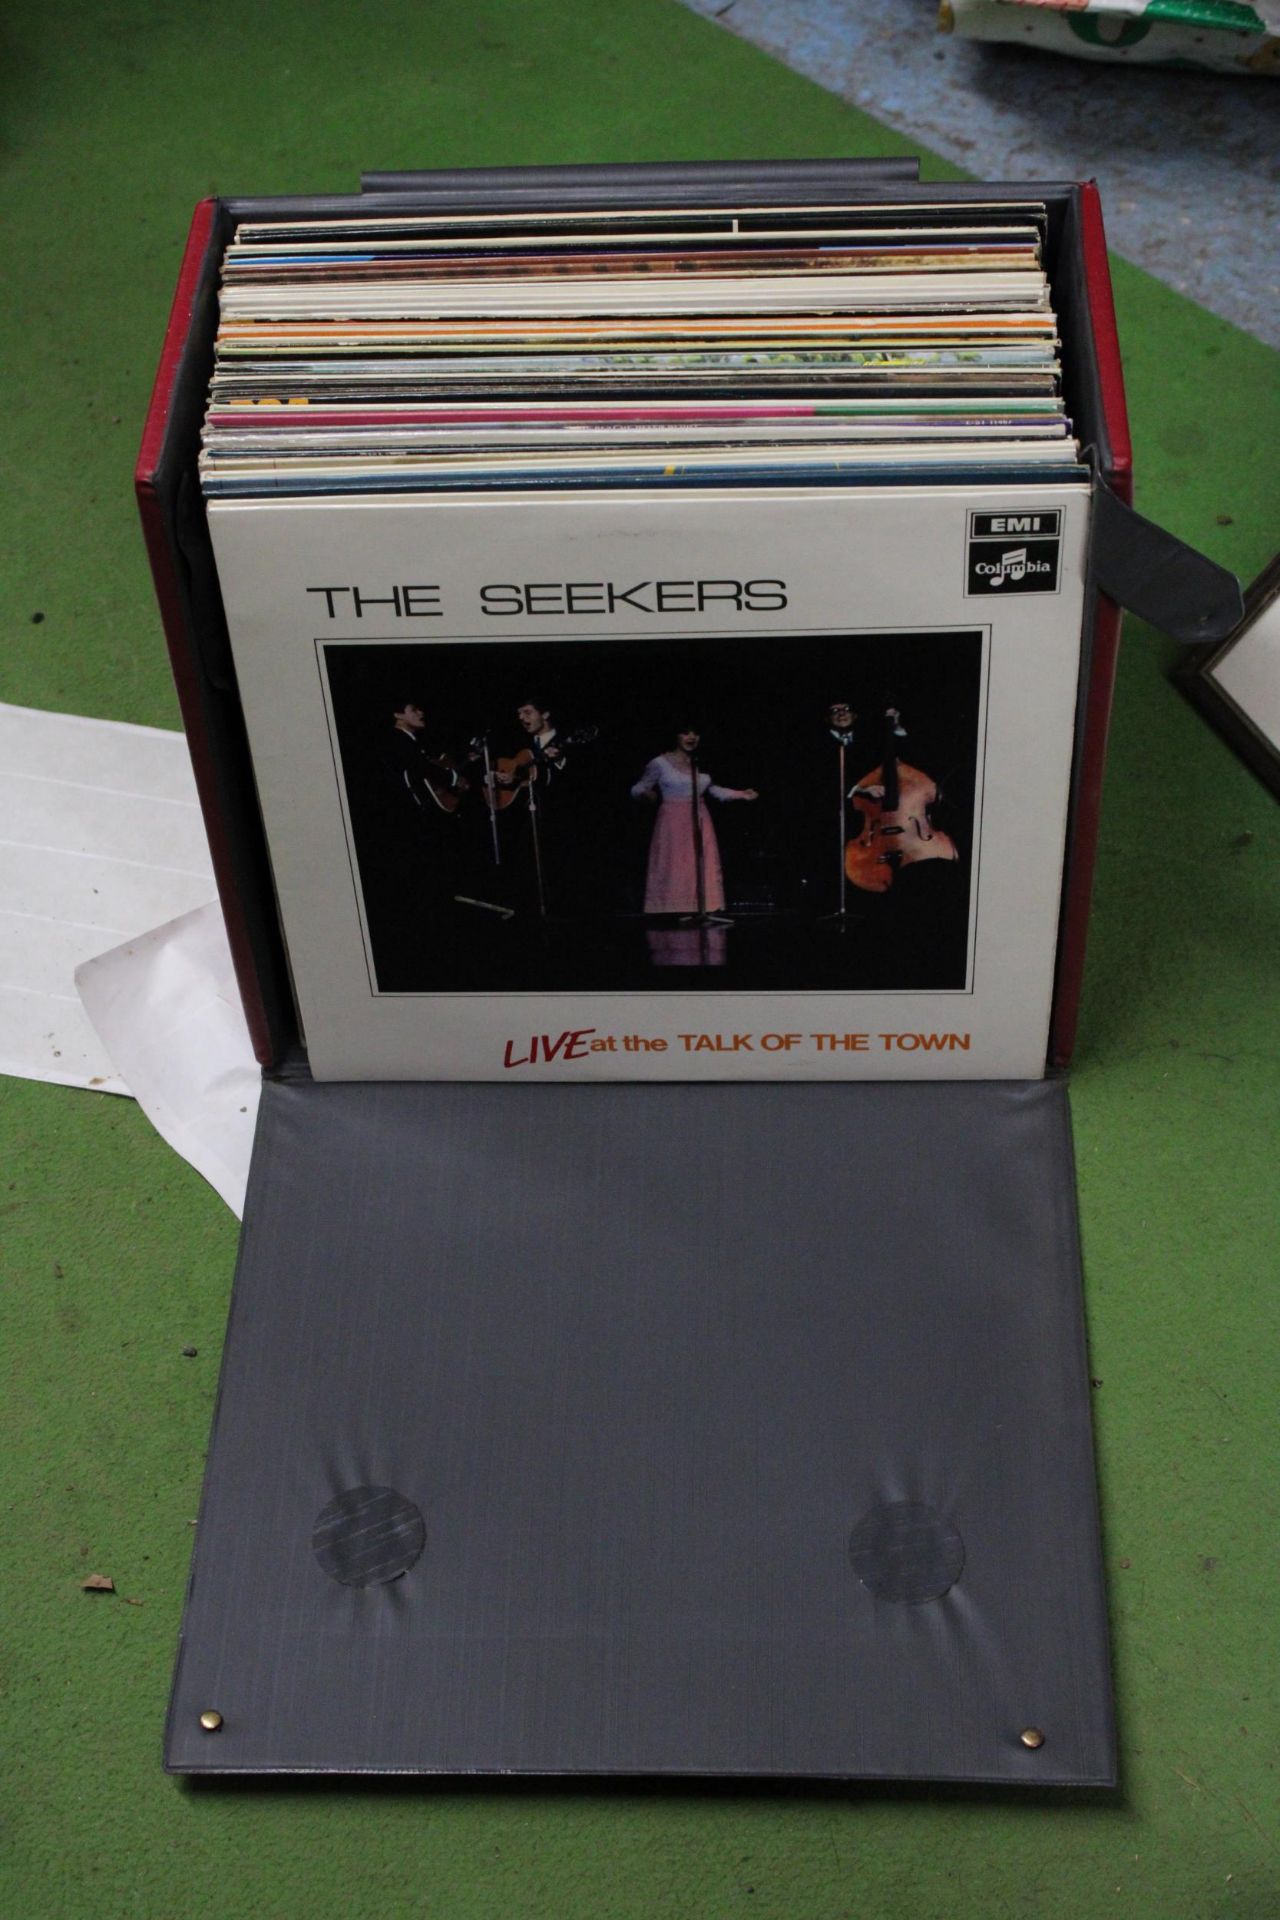 A QUANTITY OF VINYLS IN CASE TO INCLUDE SHIRLEY RASSEY, BARBRA STREISAND, ABBA AND THE SEEKERS